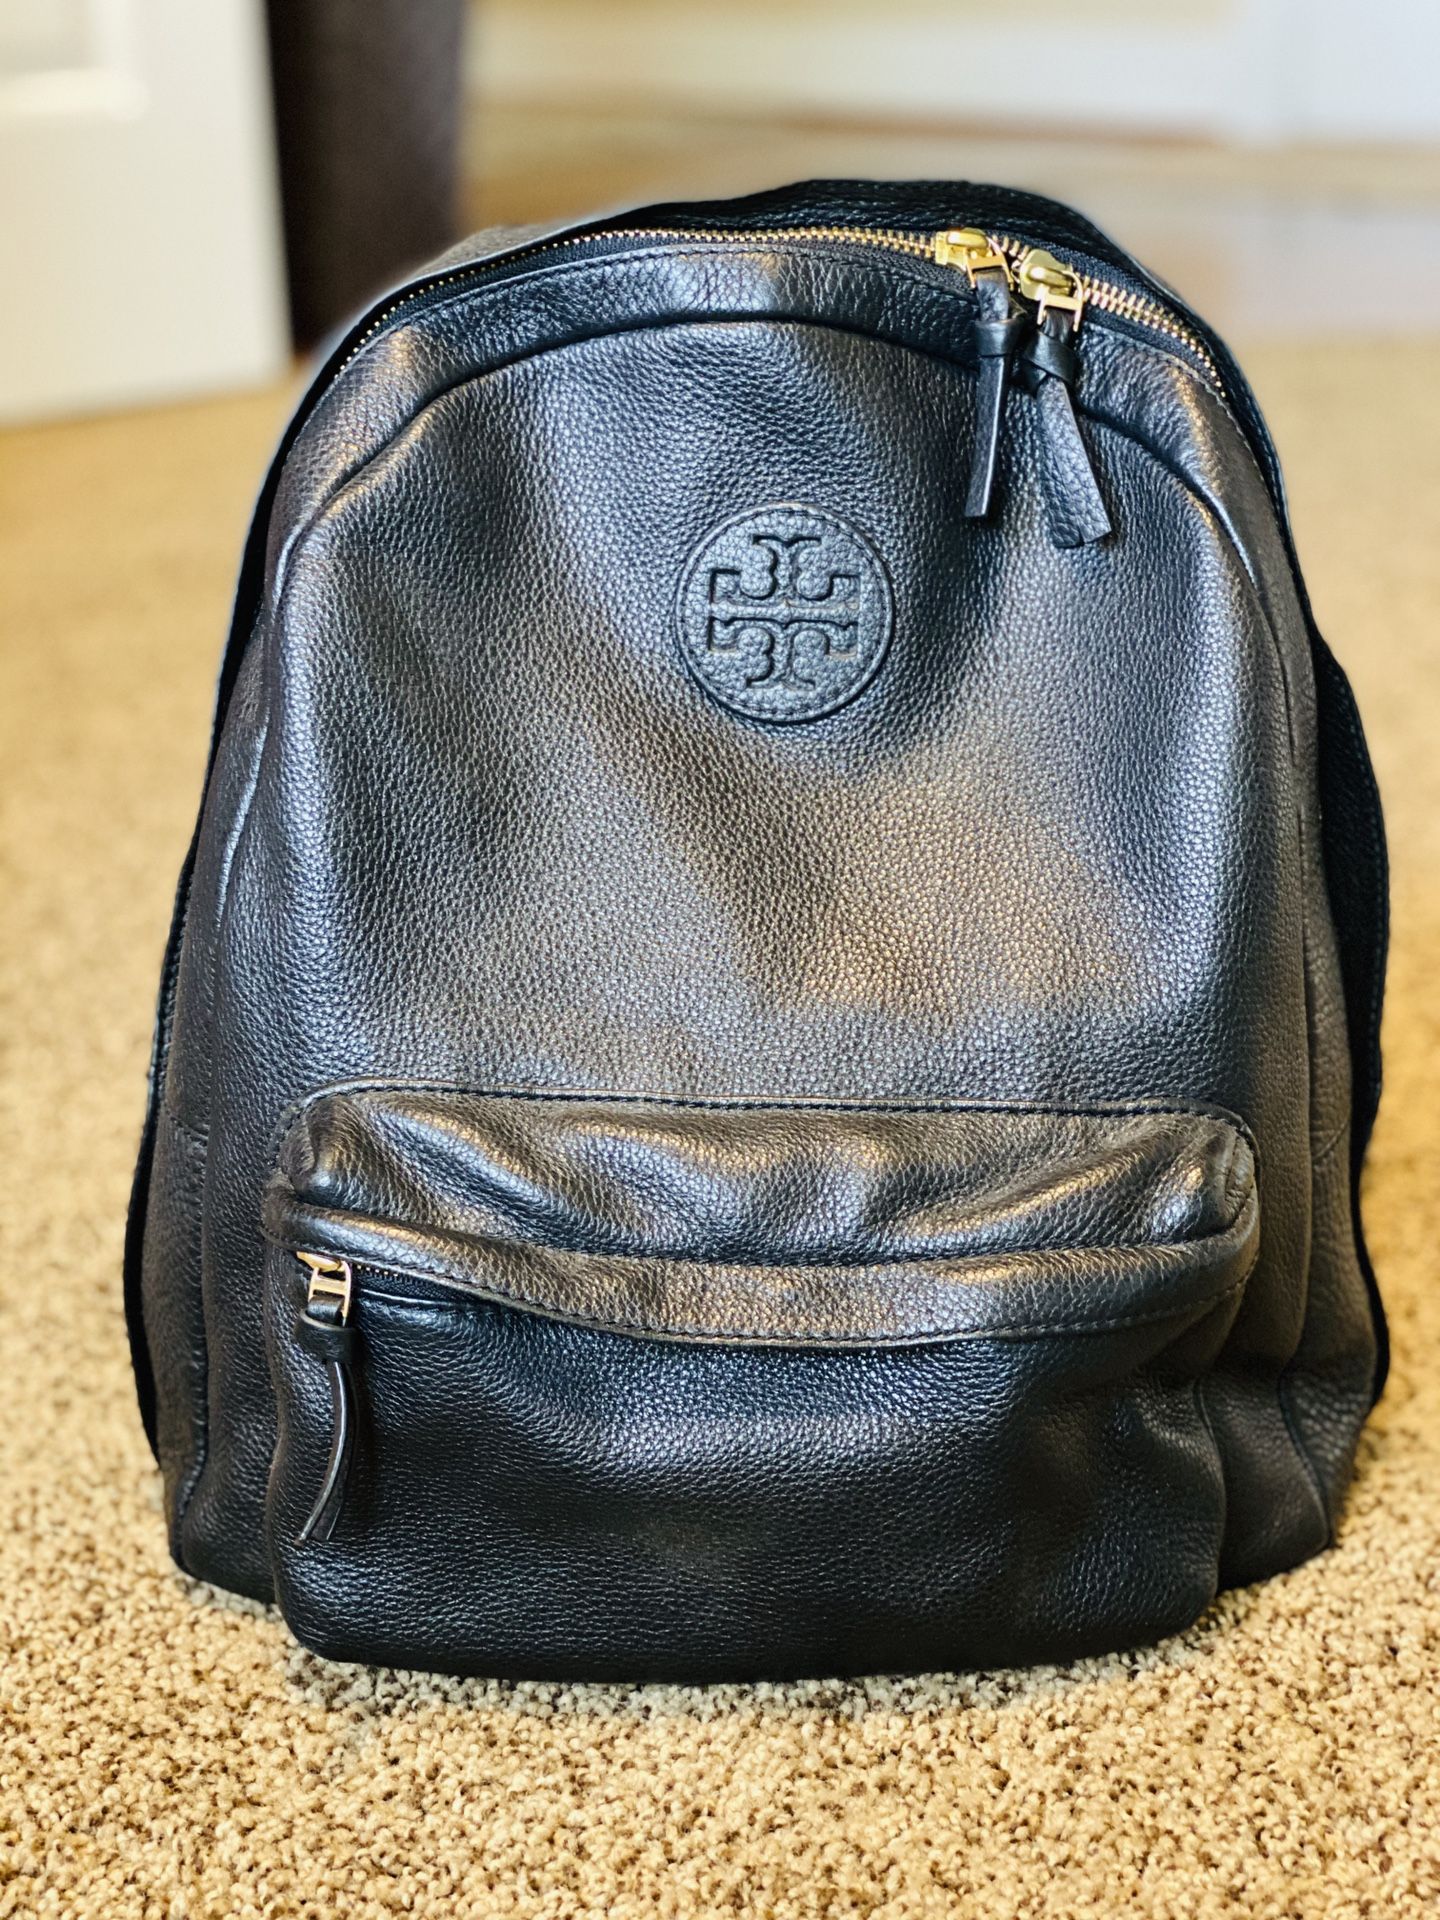 Tory Burch Black Leather Backpack